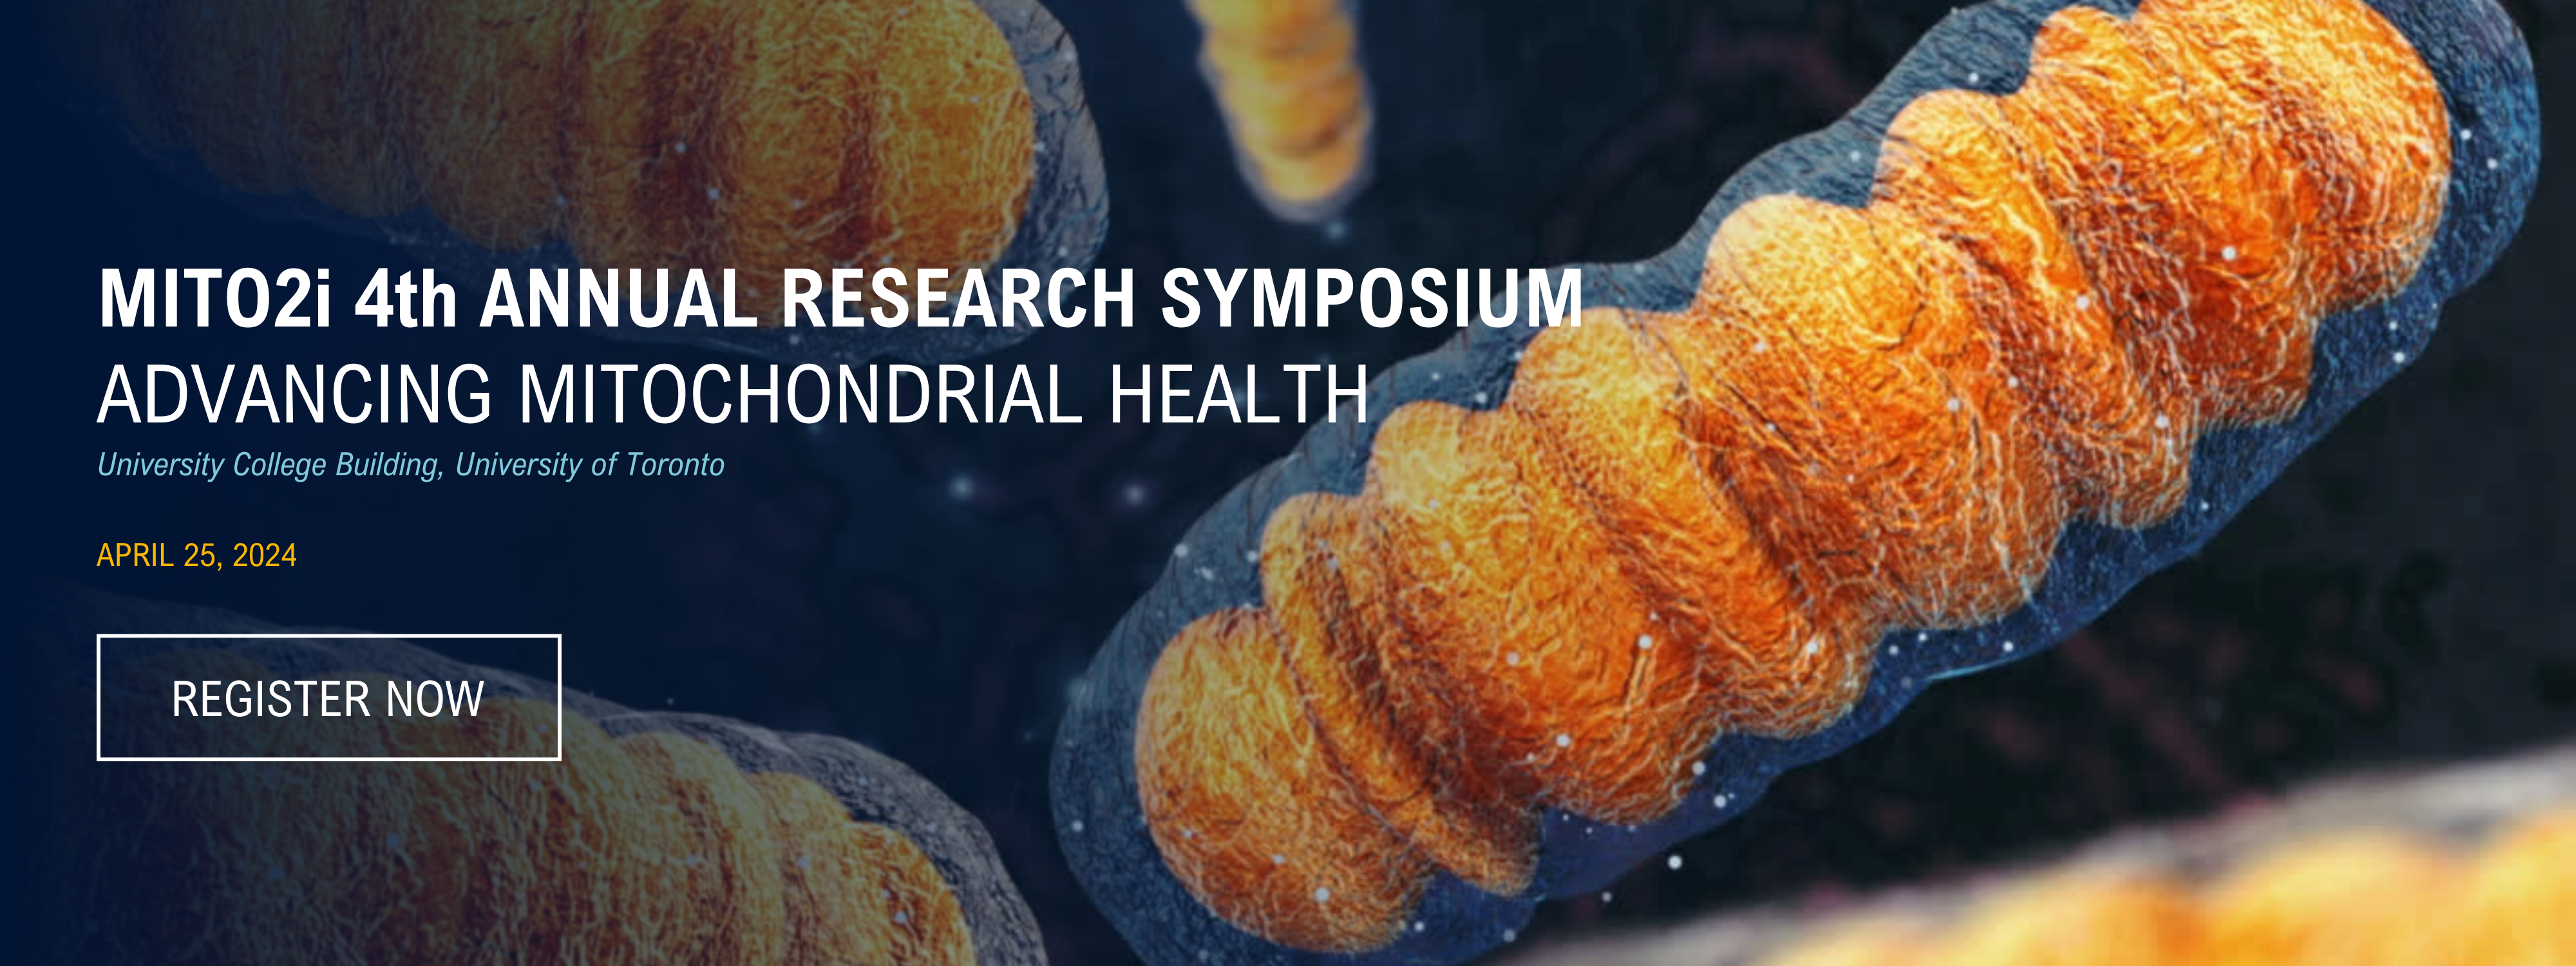 MITO2i's 4th Annual Research Symposium on Thursday April 25, 2024. Advancing Mitochondrial Health. At the University College Building at the University of Toronto on April 25. Register Now